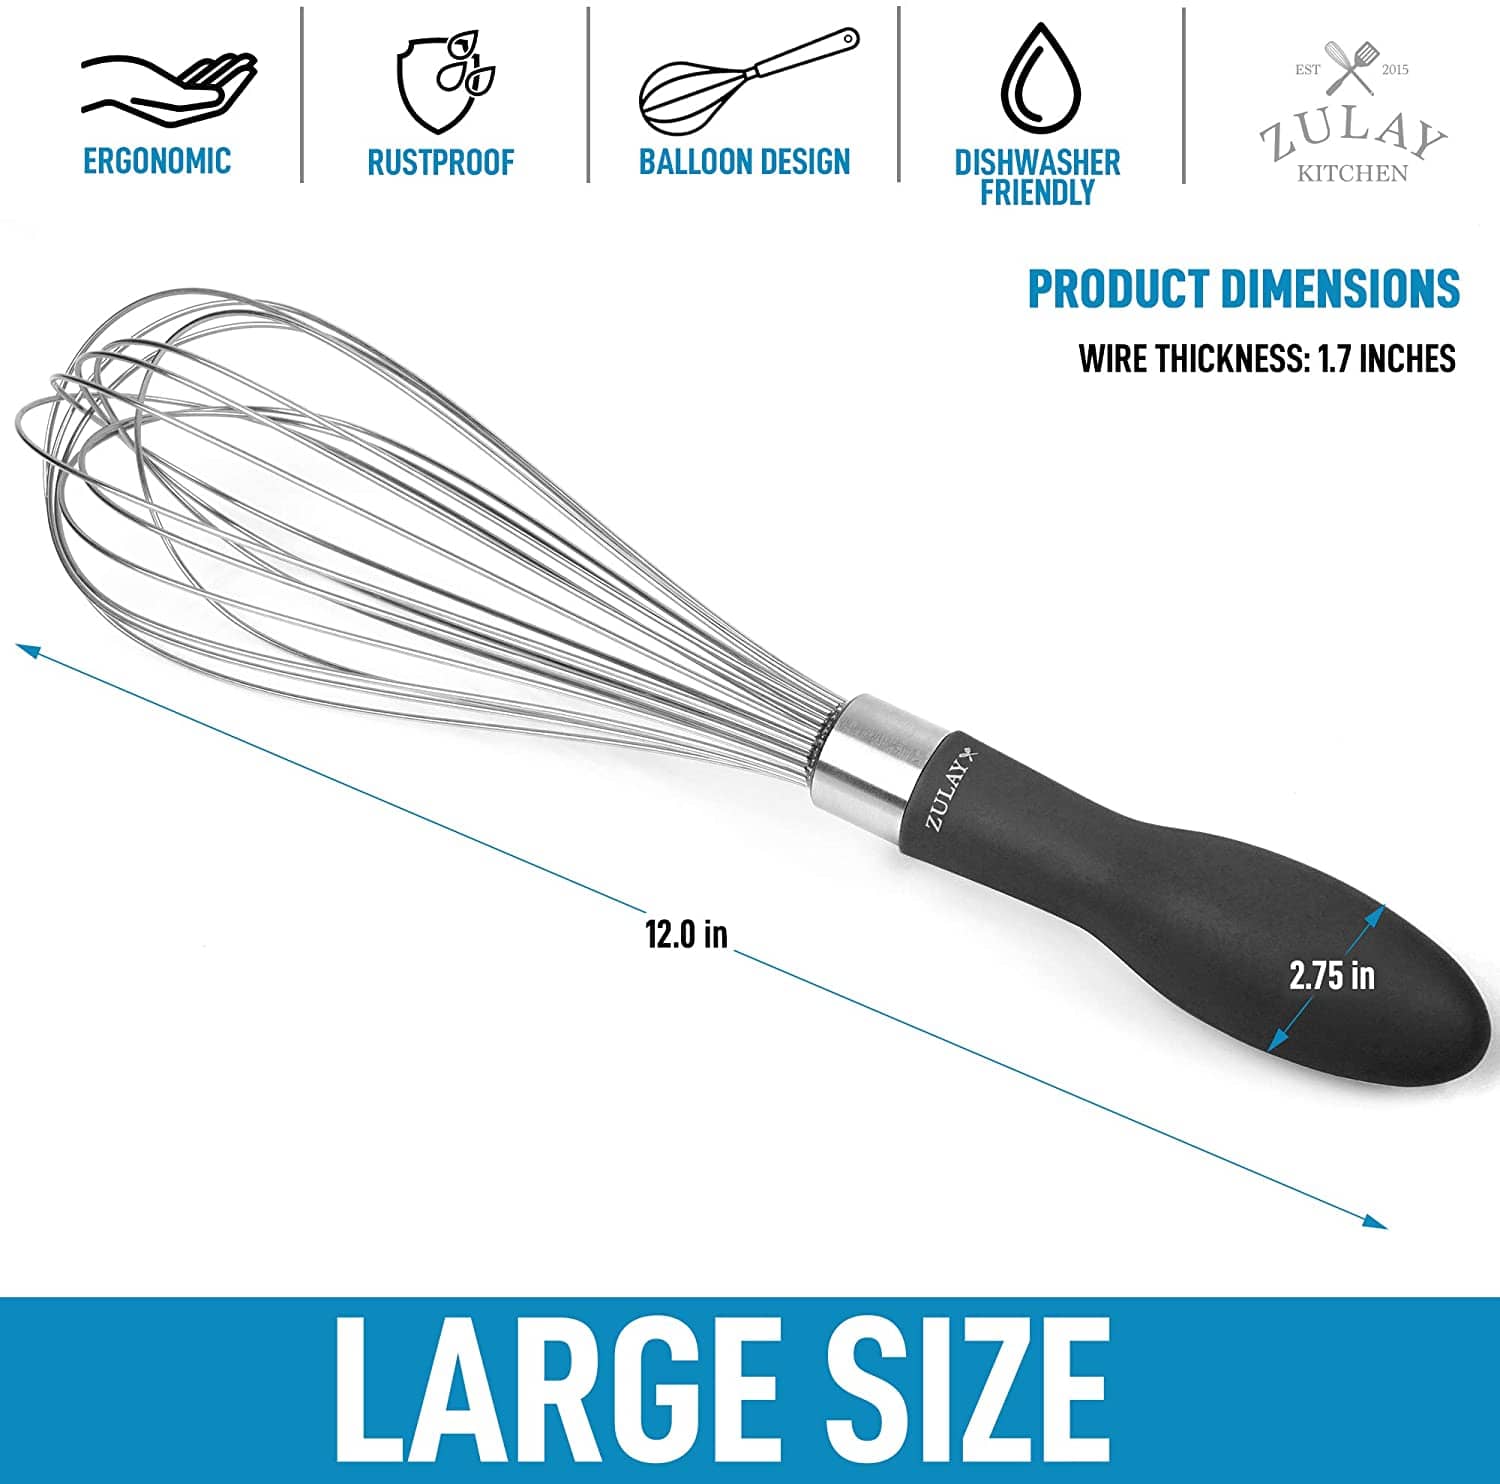  OXO Good Grips 11-Inch Silicone Balloon Whisk - Red